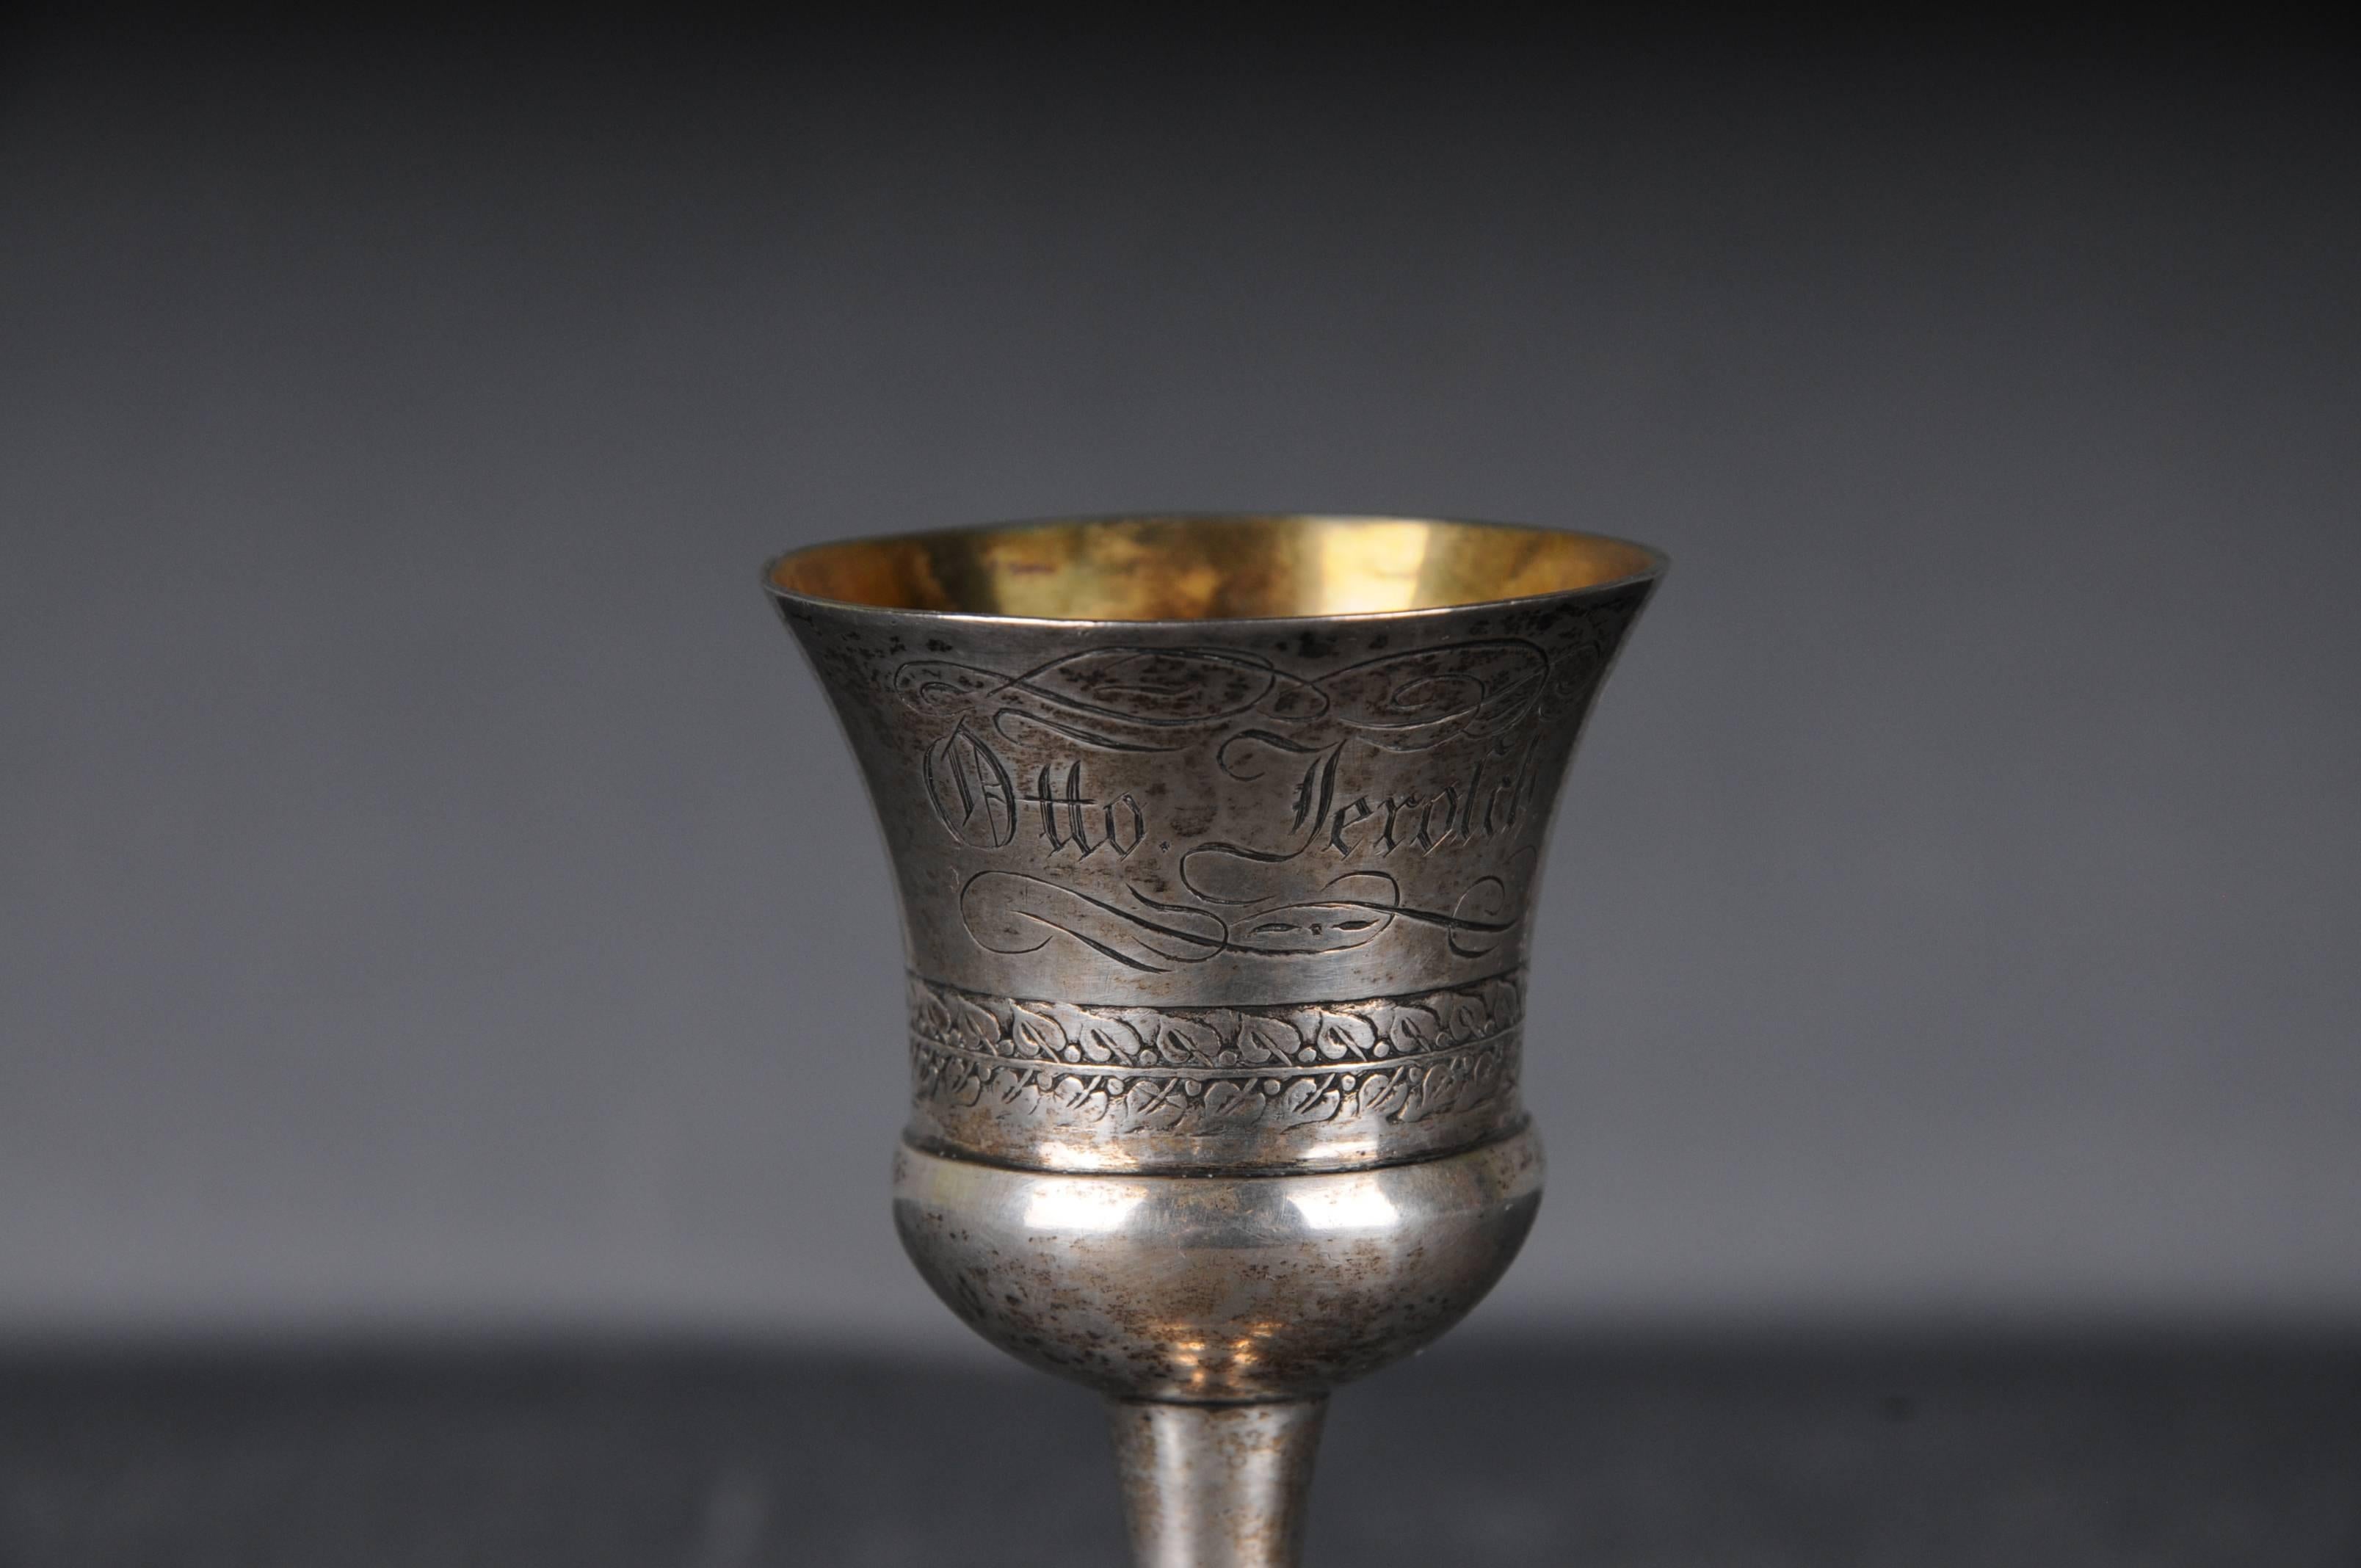 Antique Silver Chalice Cup Miniature

with engraving
Inside Gold plated

Germany - Probably from Munich

Weight: 37 grams

The condition can be seen in the pictures.